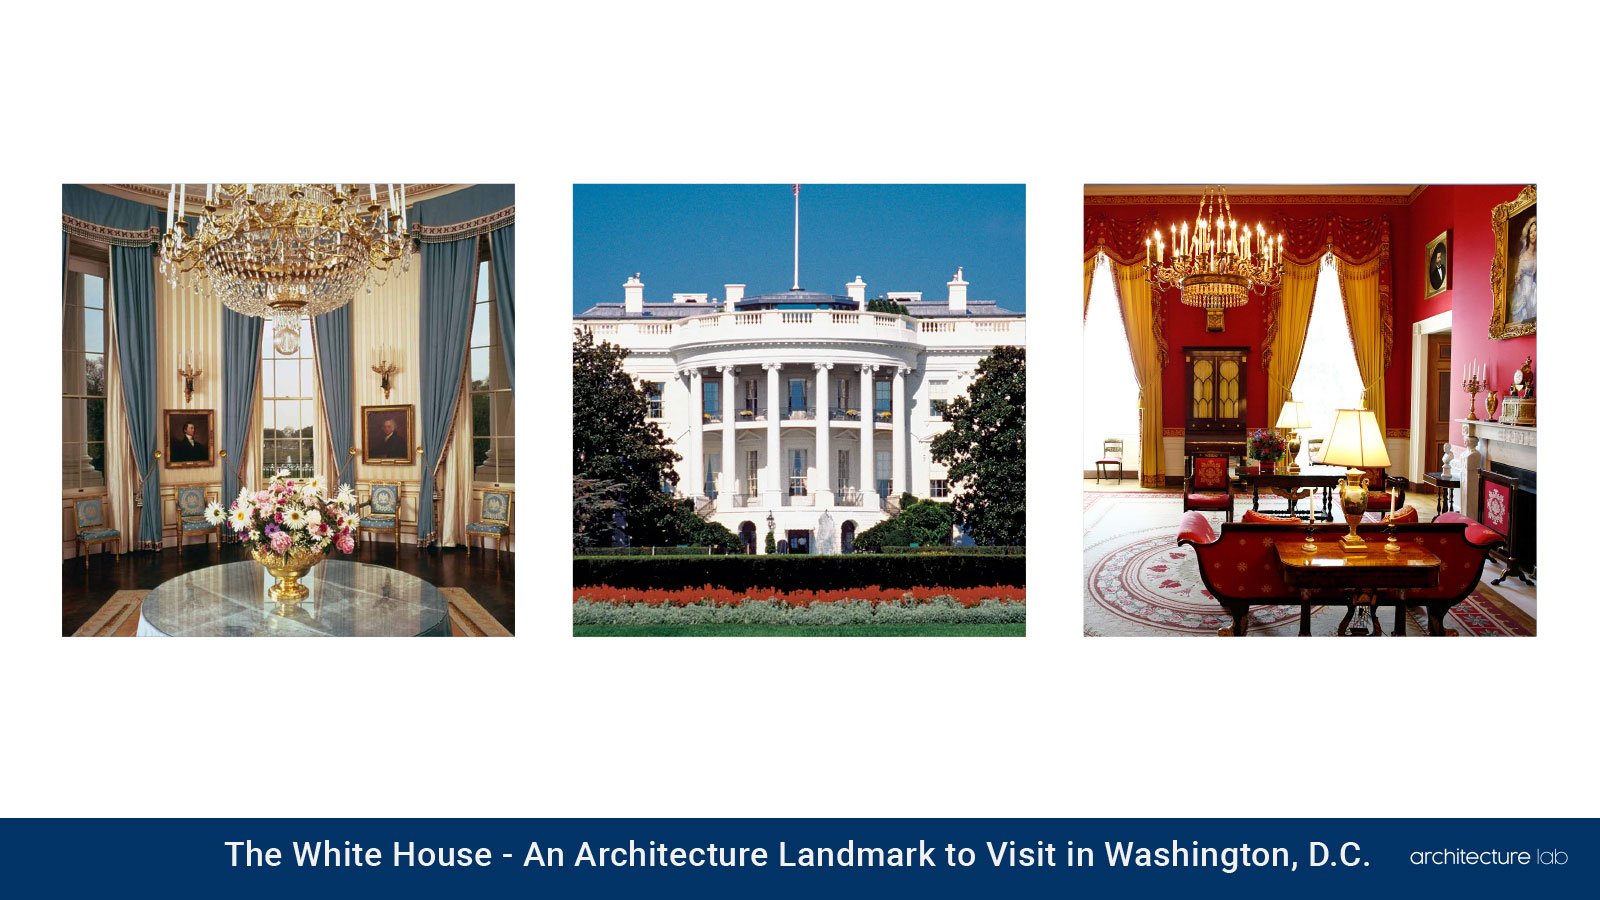 The white house: an architecture landmark to visit in washington, d. C.